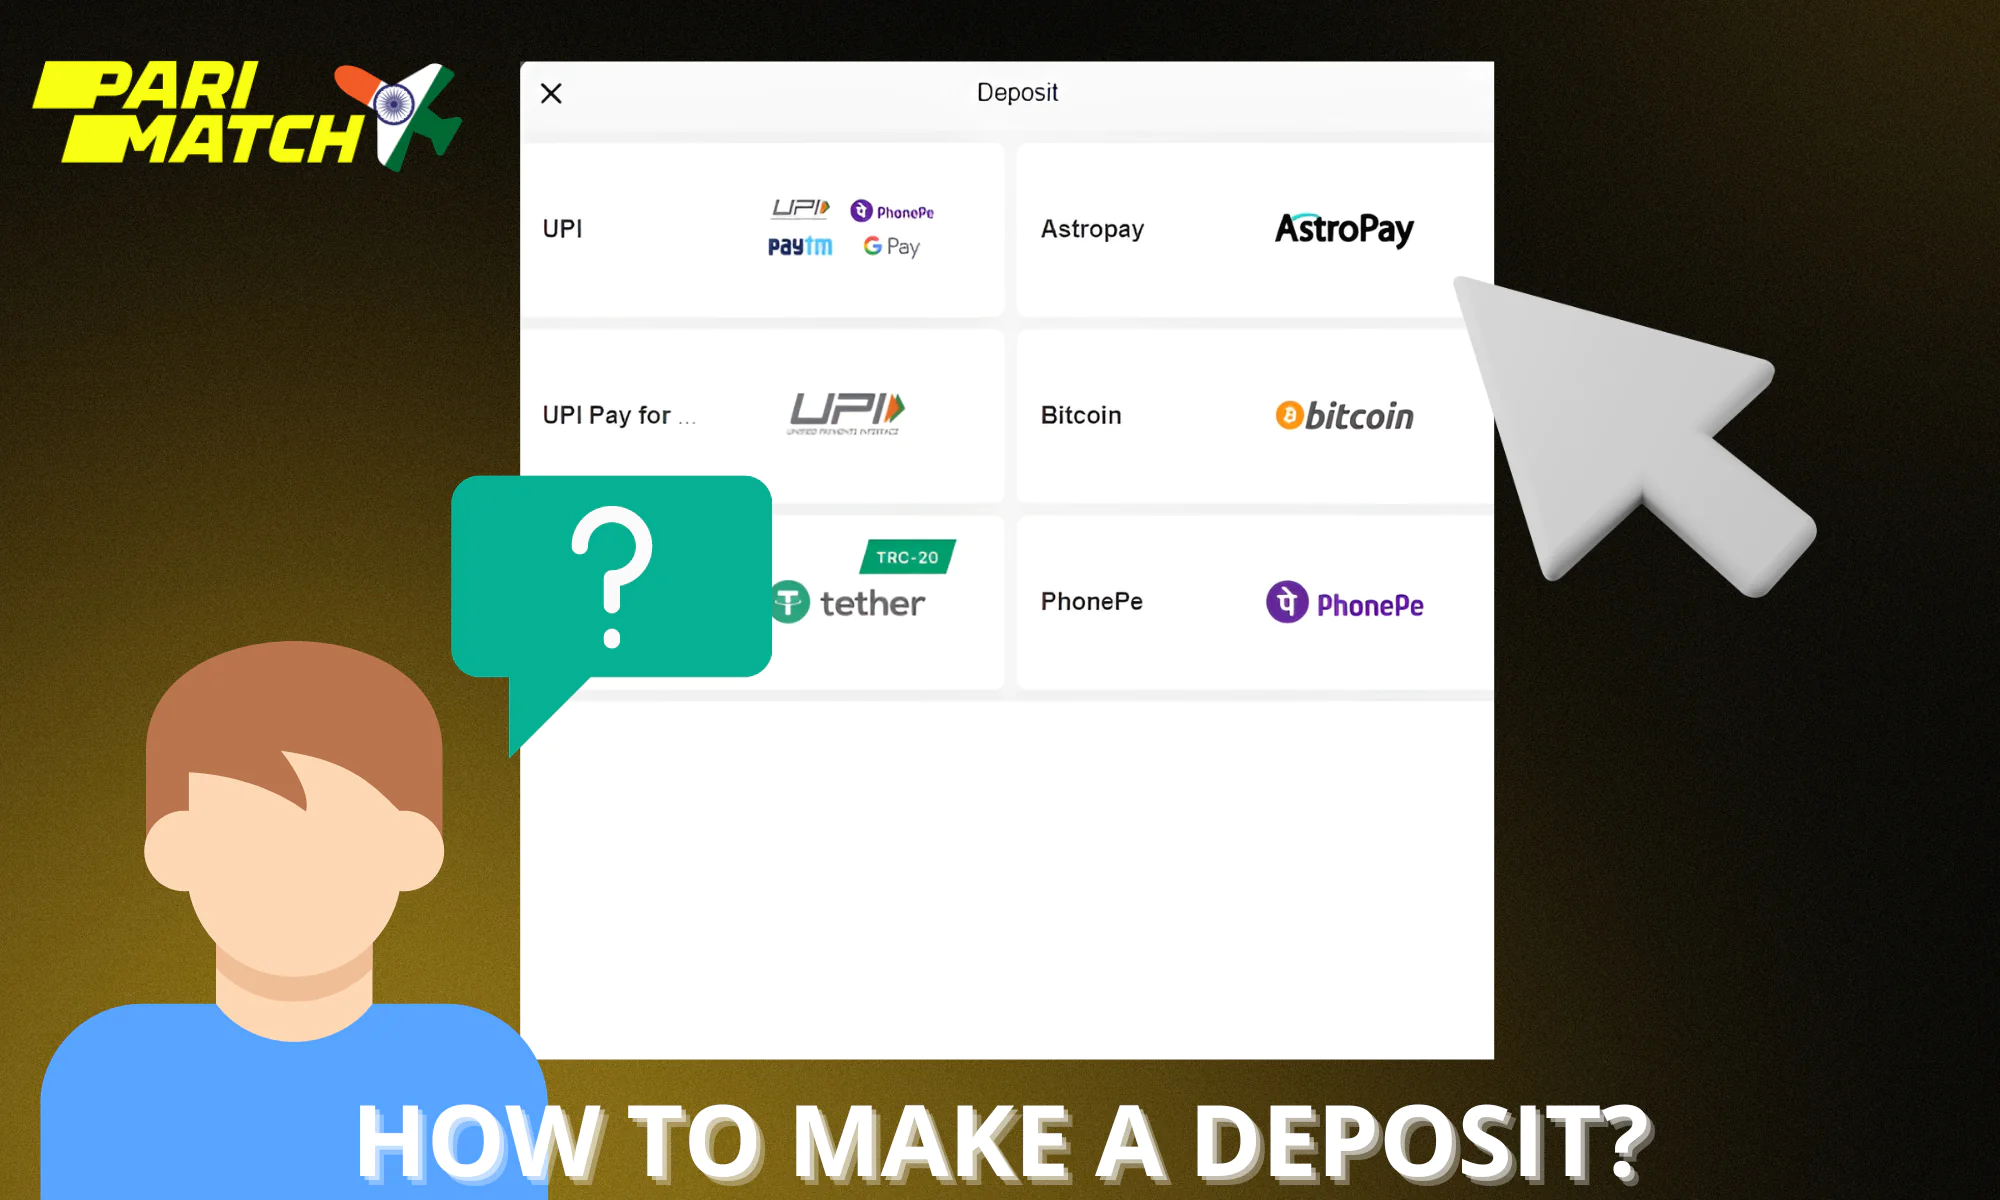 Step by step how to make a deposit in Parimatch Aviator